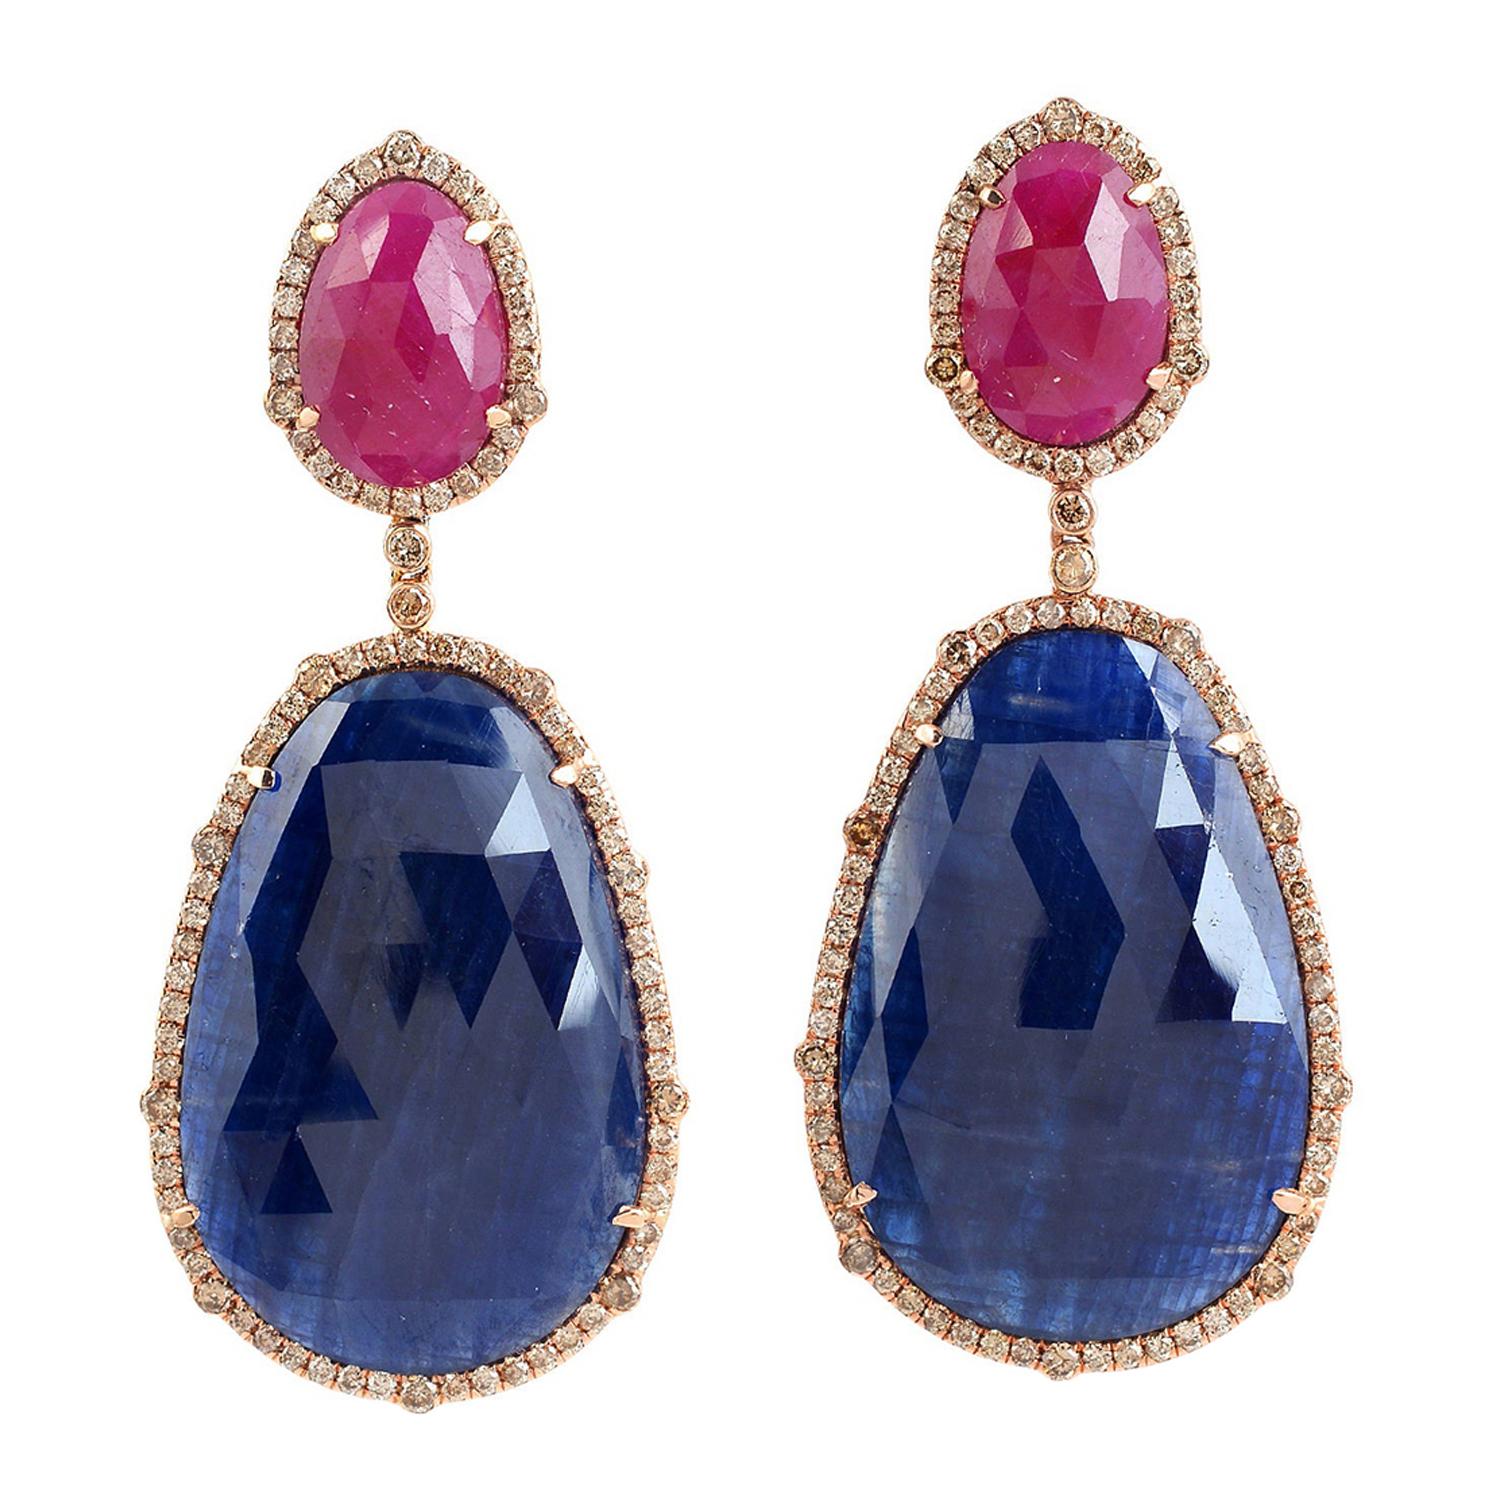 Sliced Ruby and Sapphire Earring Set In 18k Gold with Diamonds